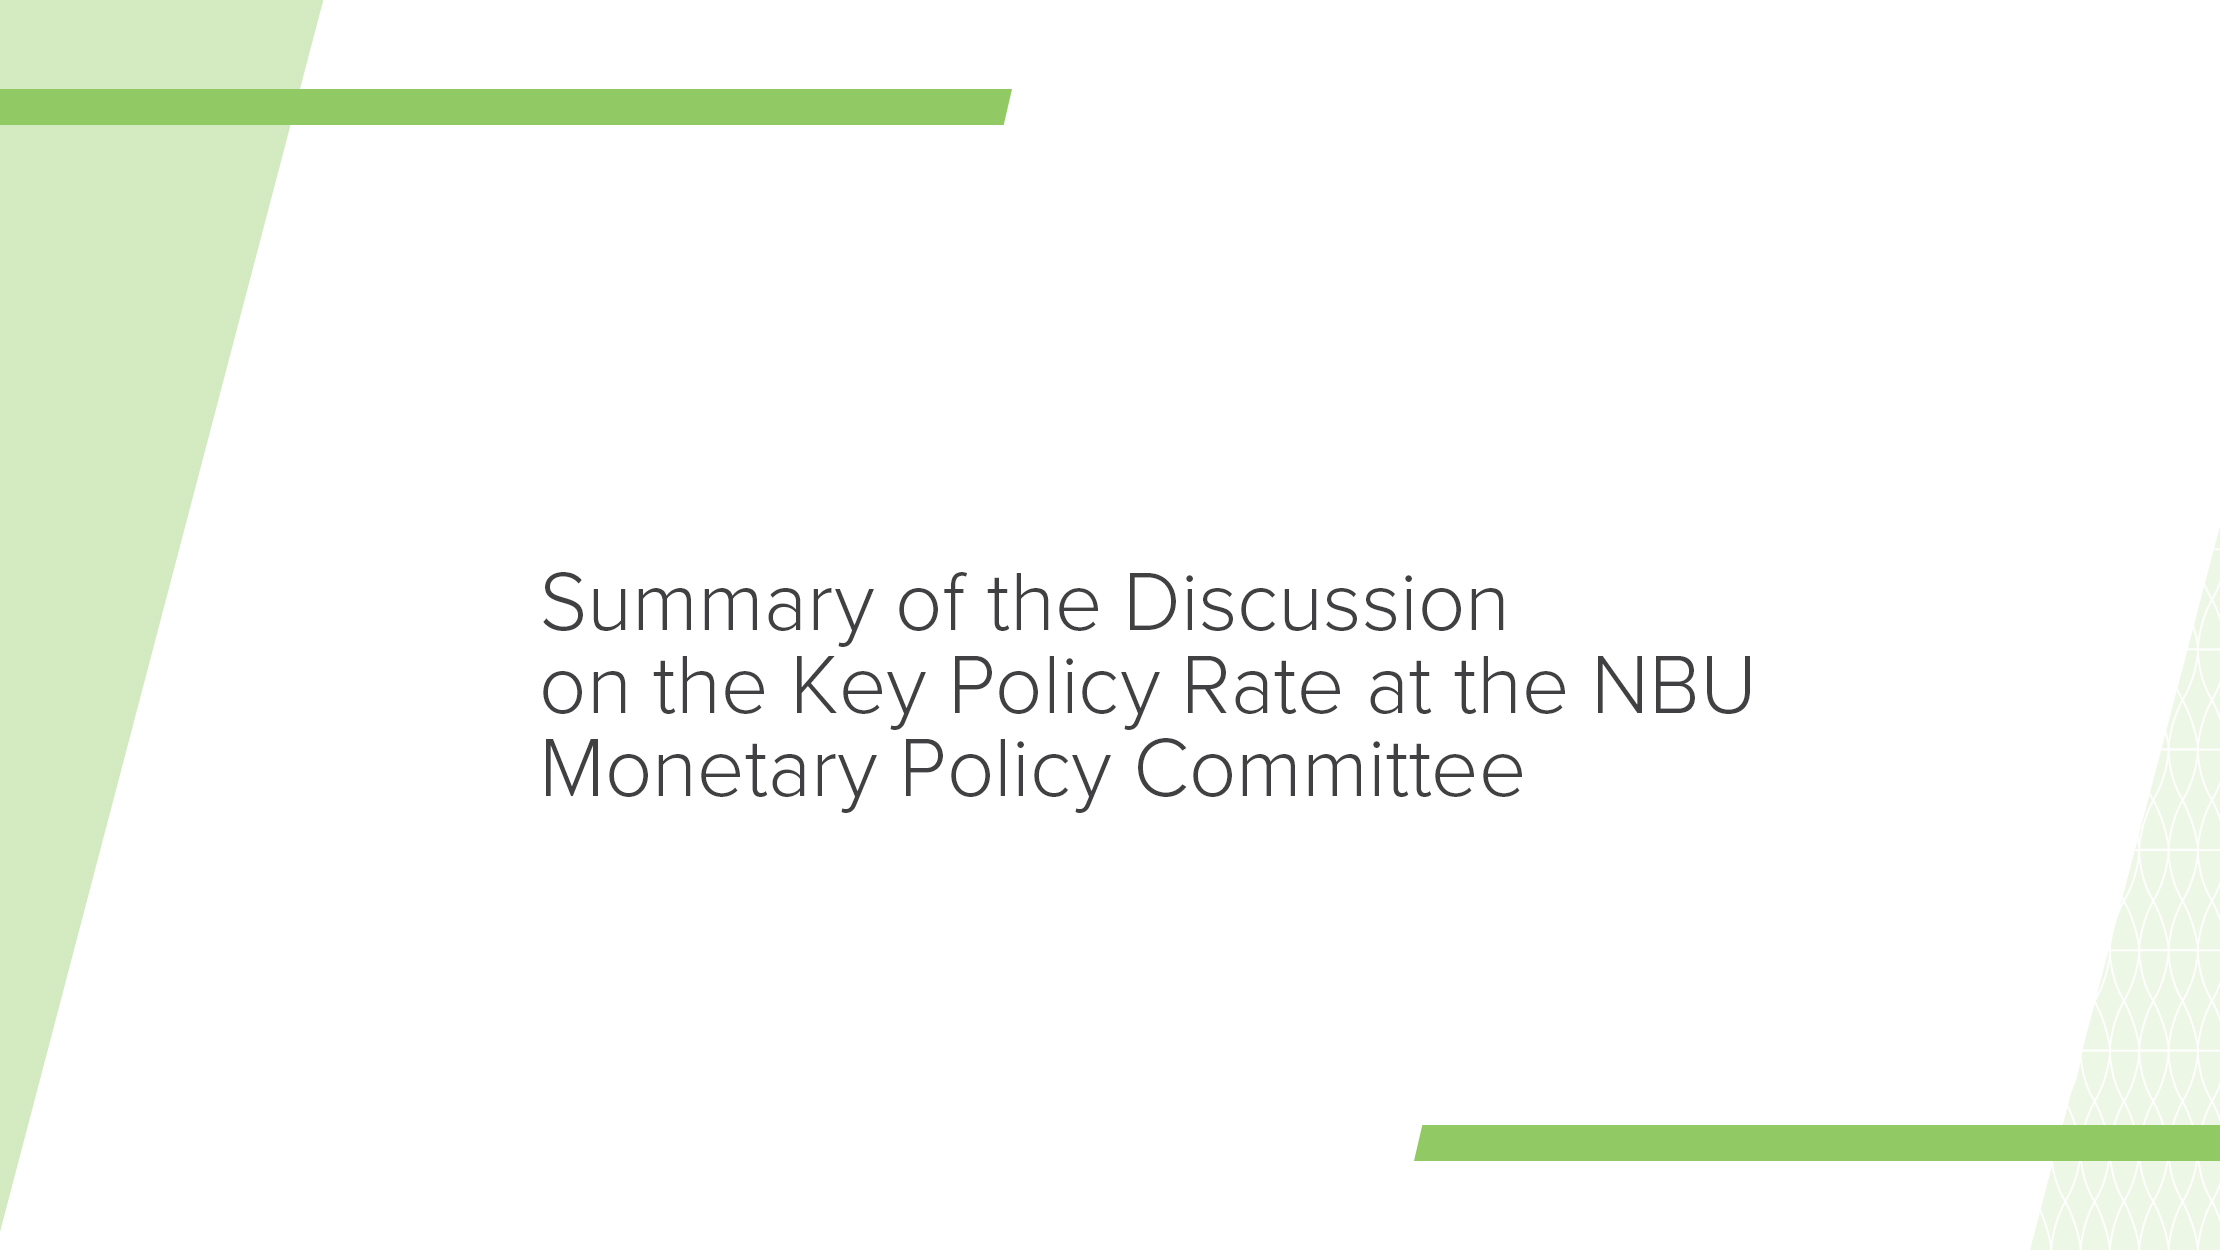 Summary of Key Policy Rate Discussion by NBU Monetary Policy Committee on 24 January 2024